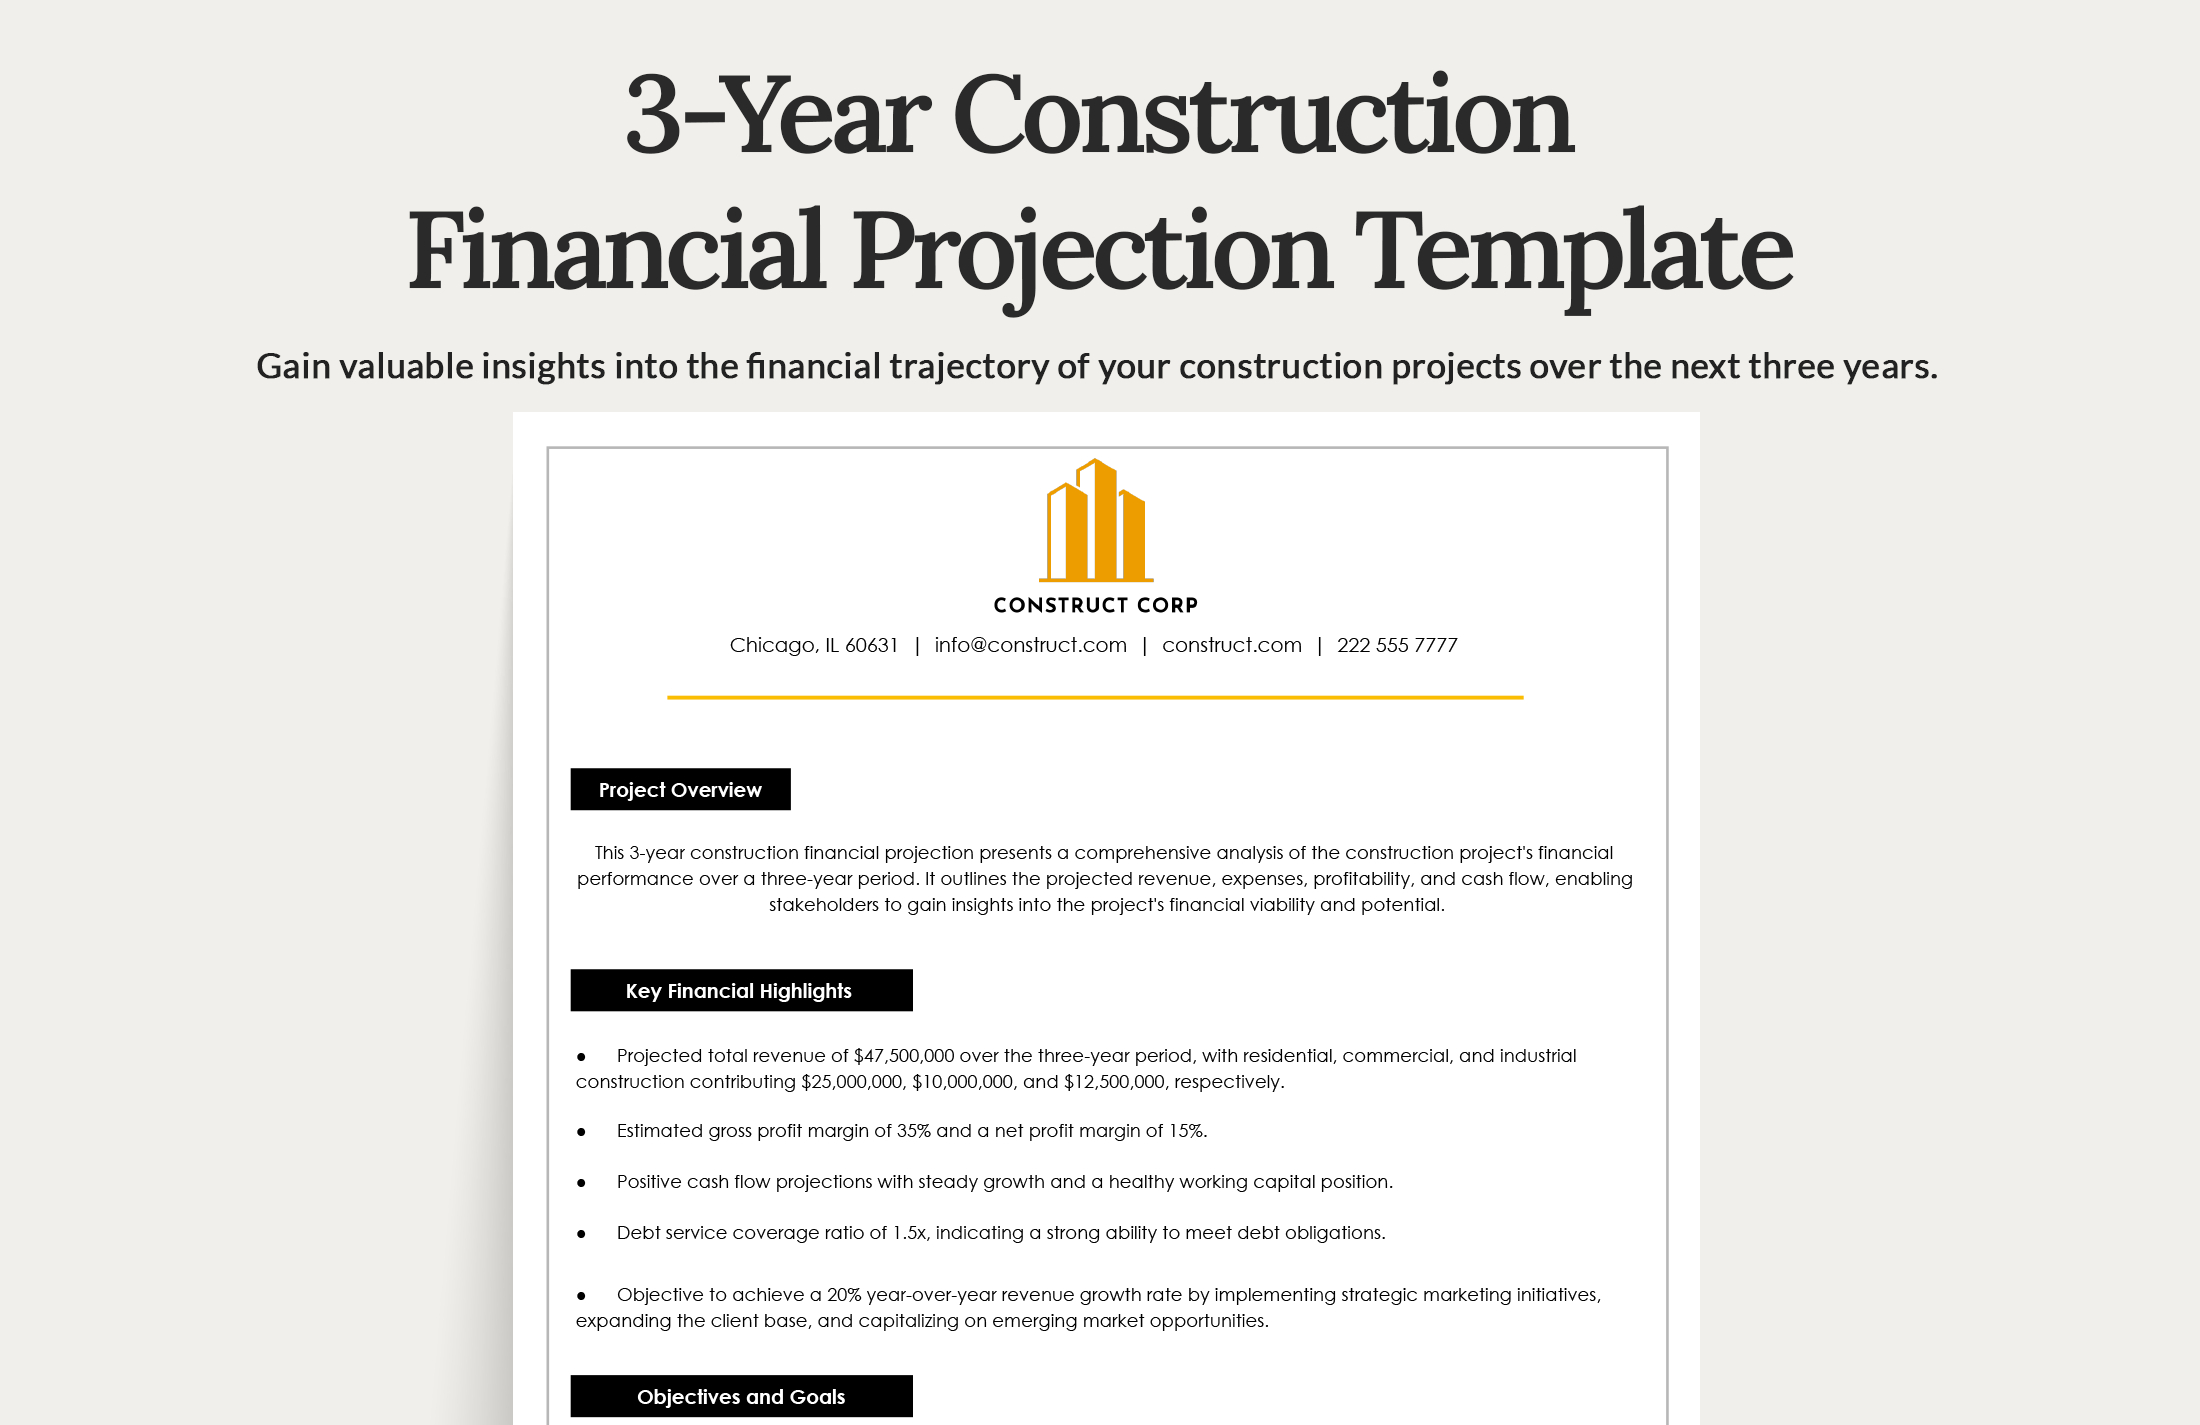 3 year construction financial projections template